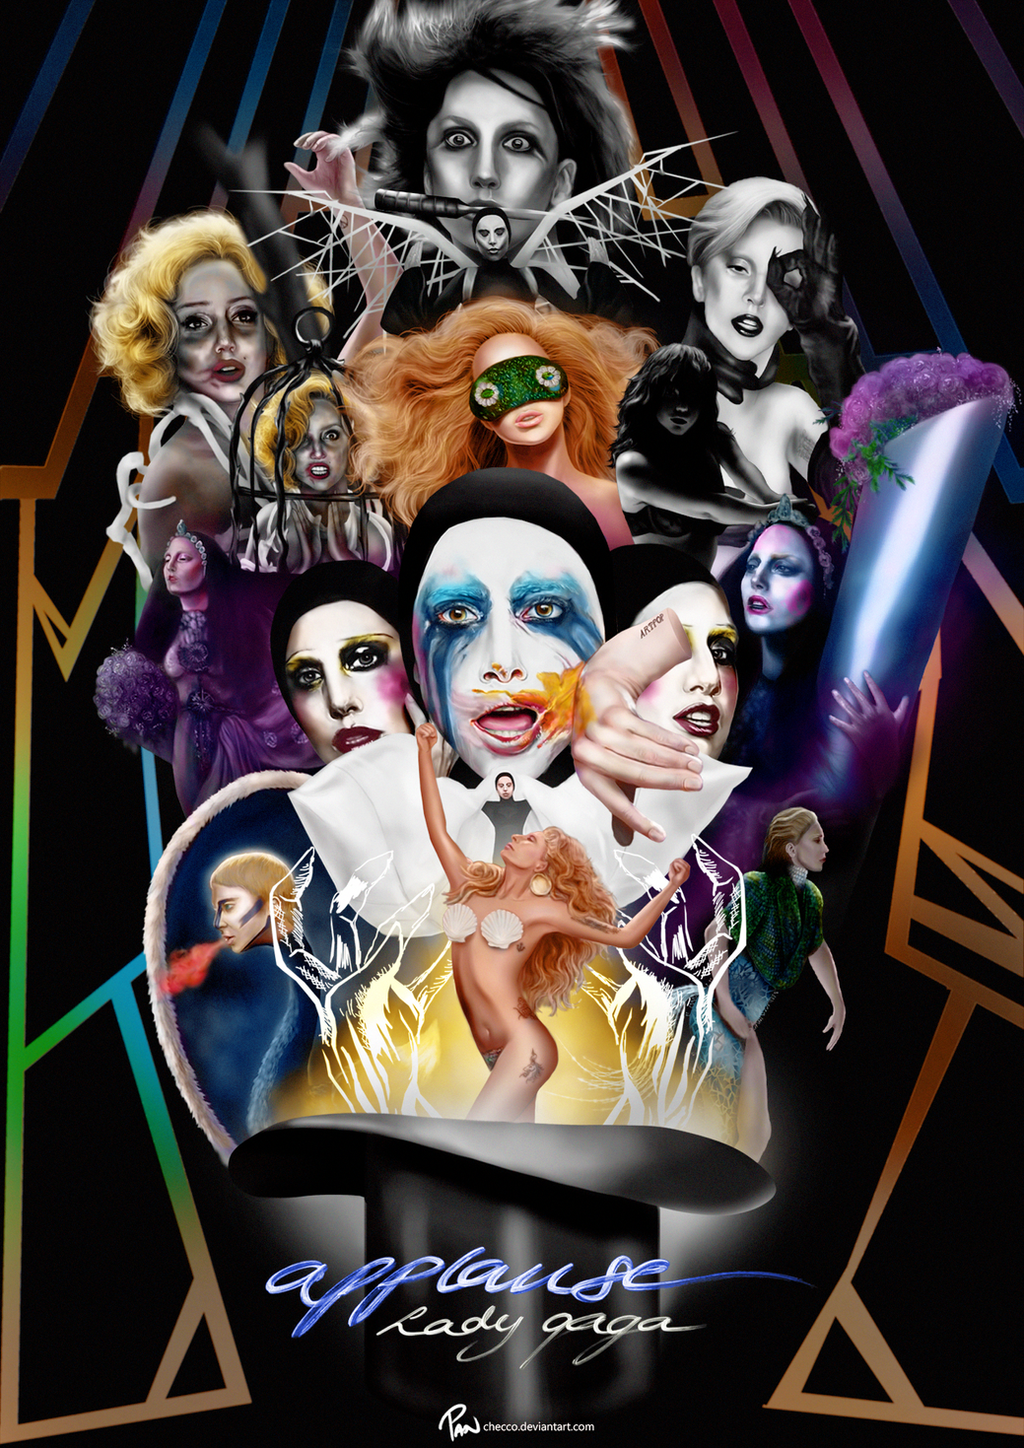 lady_gaga___applause_music_video__poster